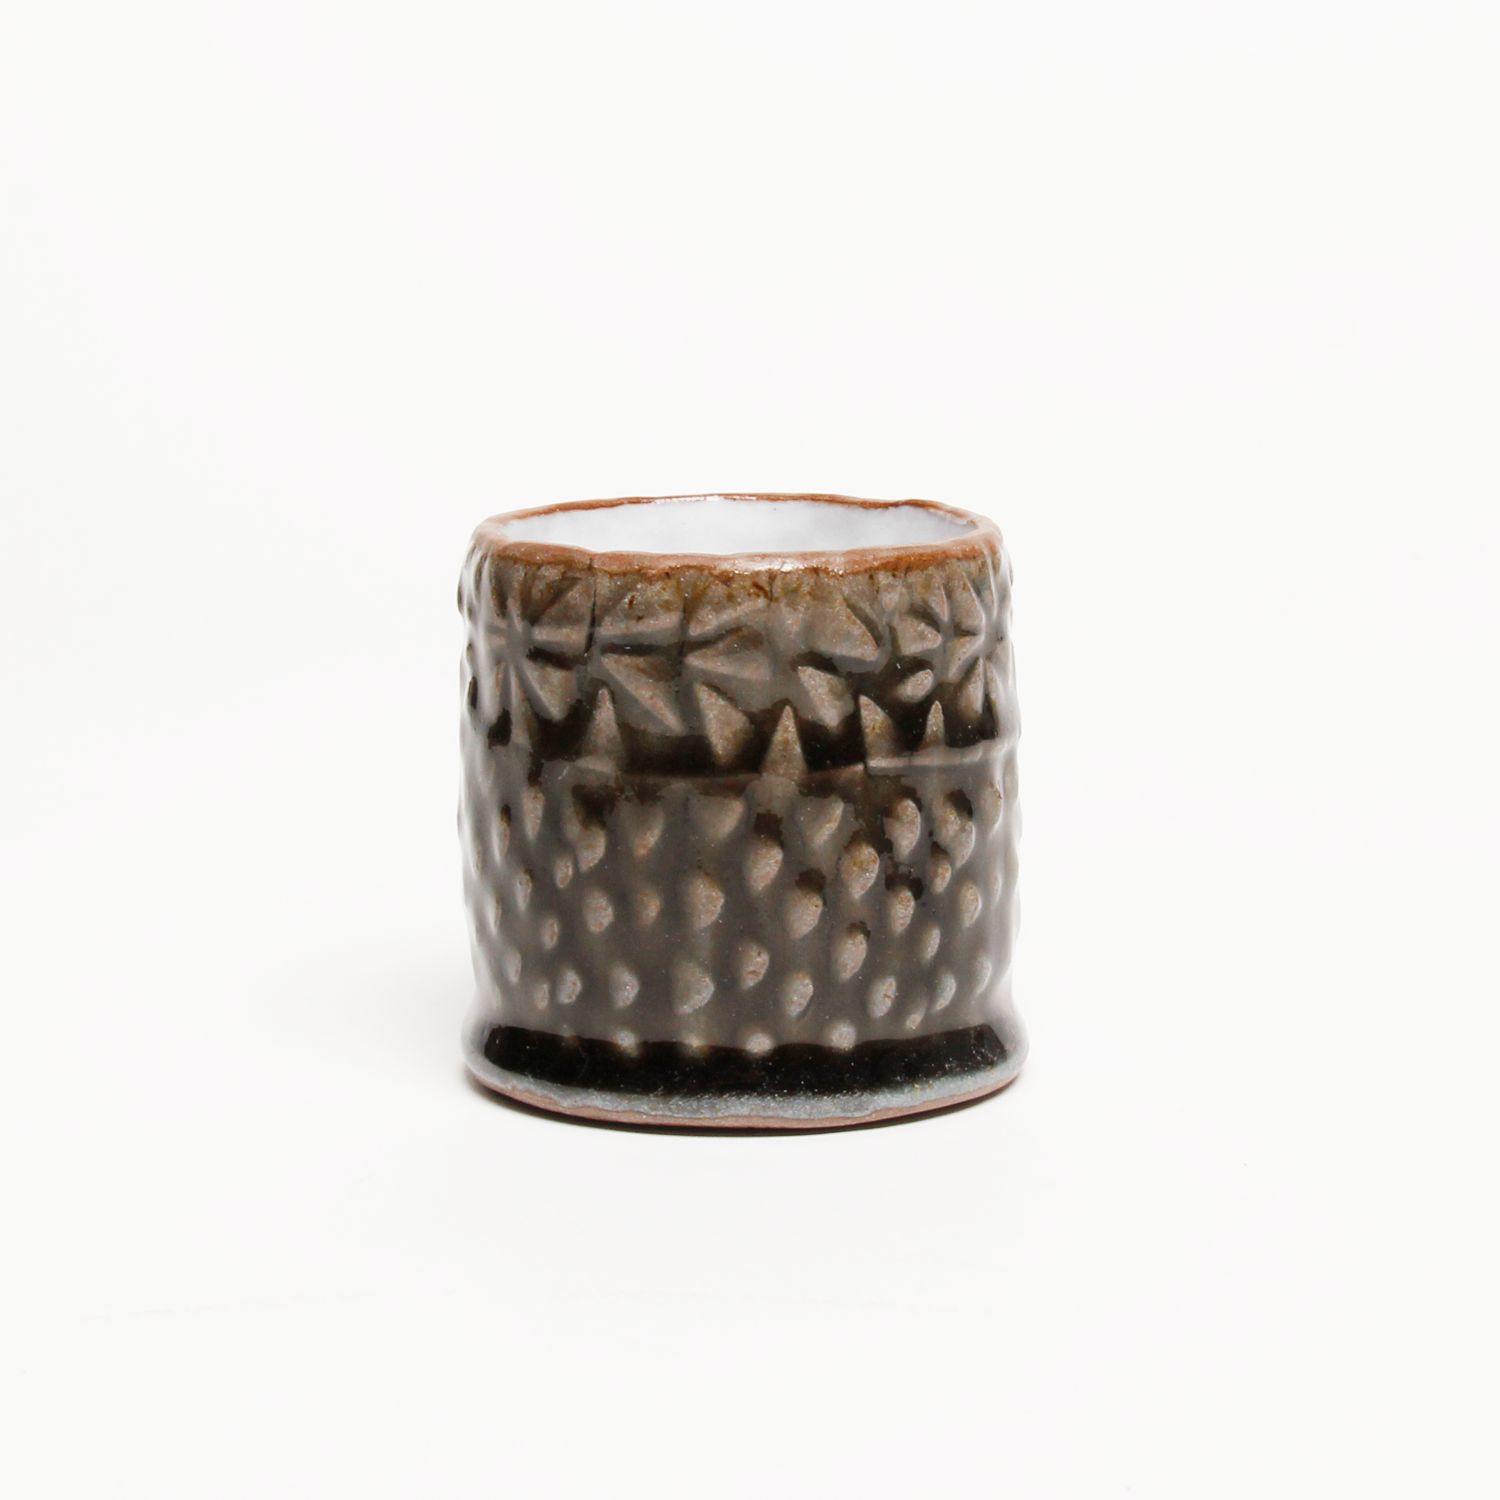 Jacquie Blondin: Textured Slab Cup Product Image 1 of 2